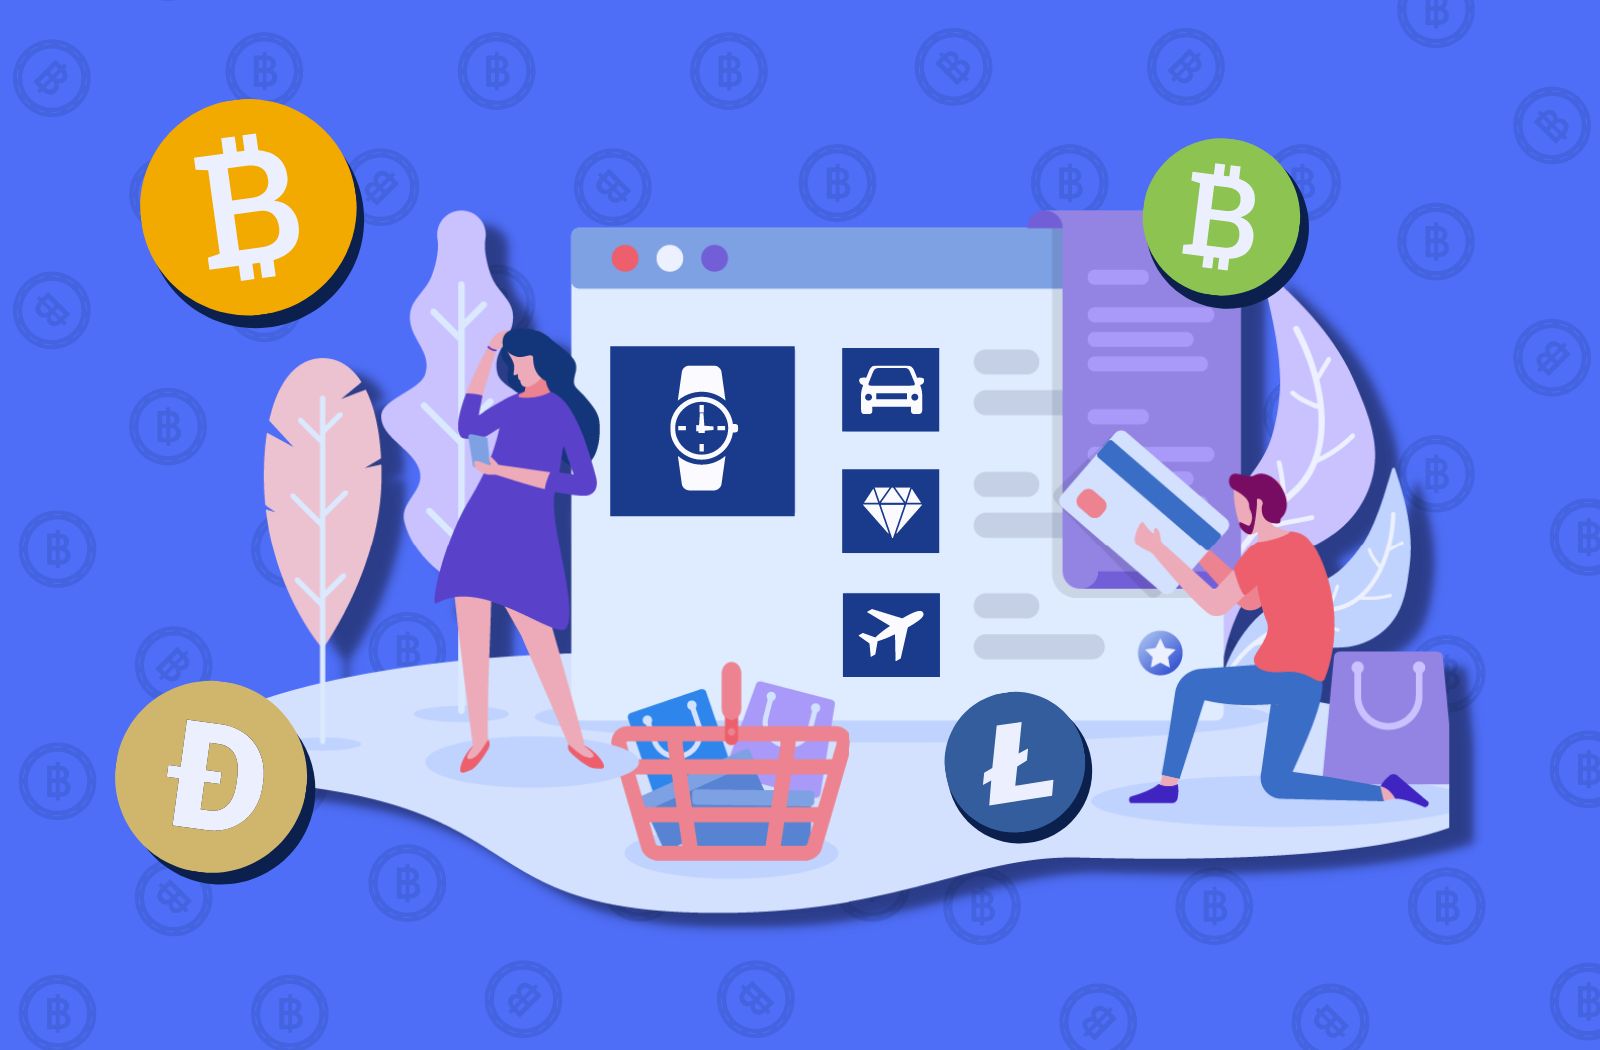 What Can You Buy With Cryptocurrency